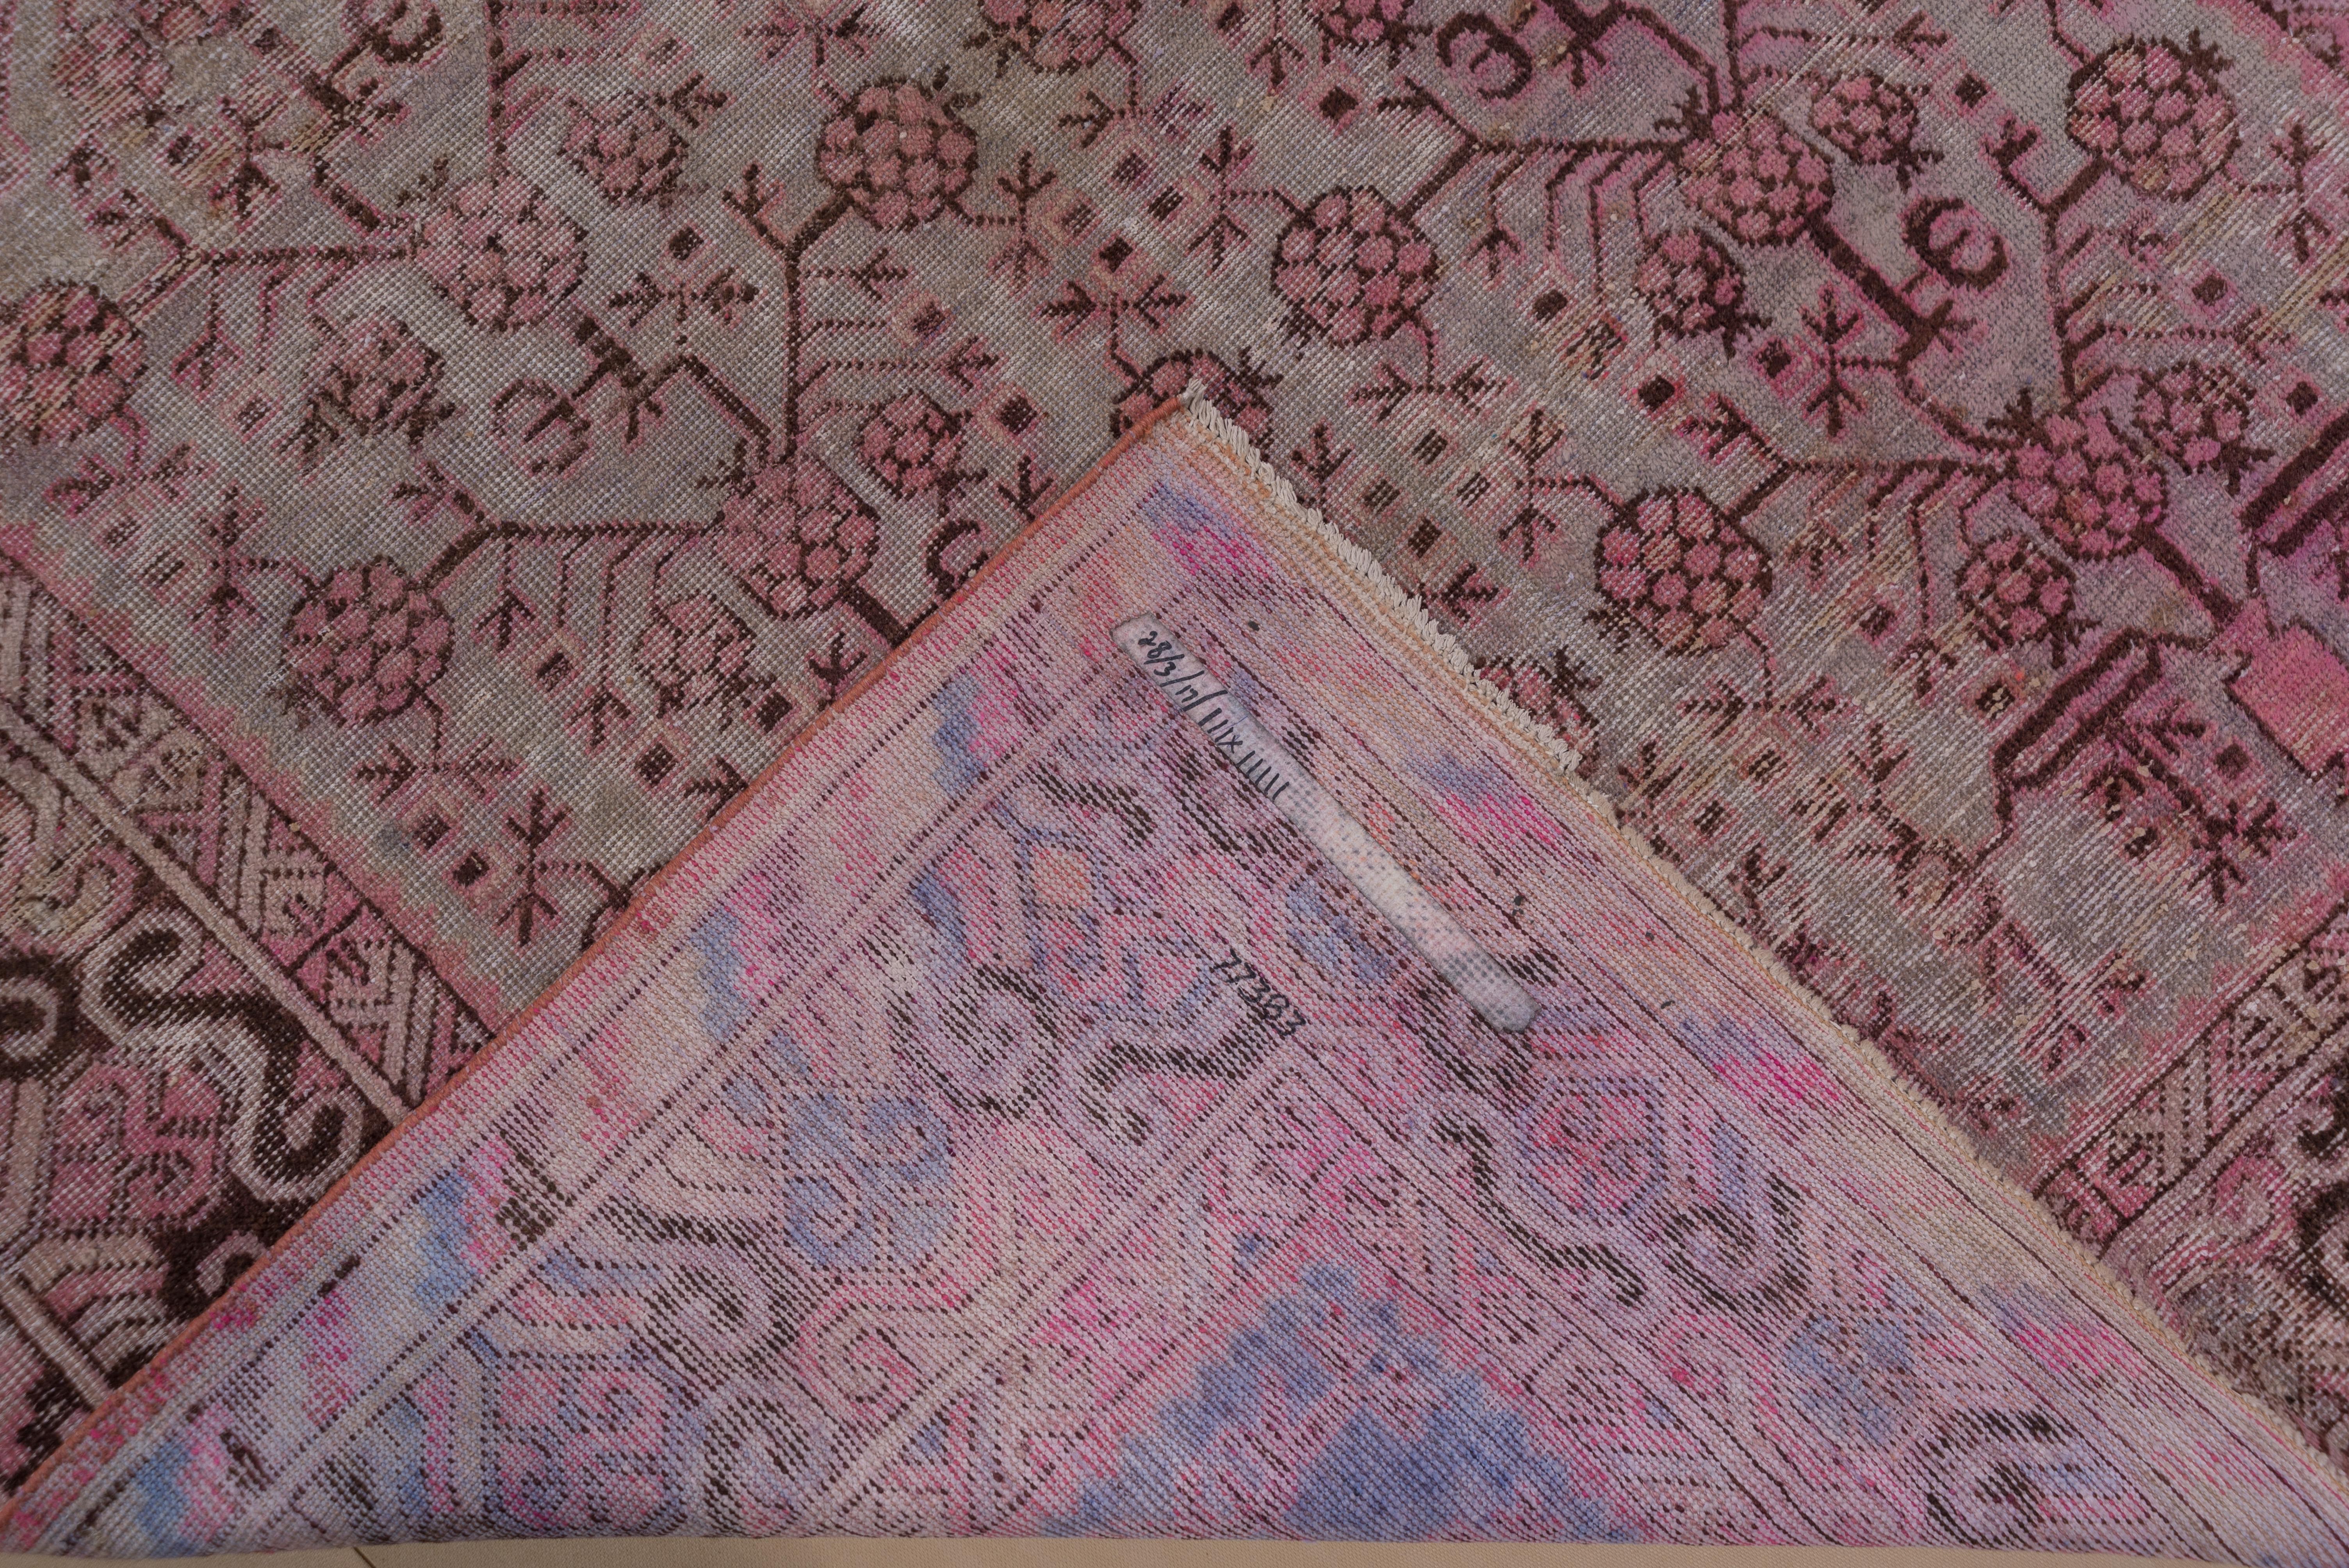 Antique Pink Khotan Rug, Gray Blue and Taupe Field, Pink and Brown Accents 4